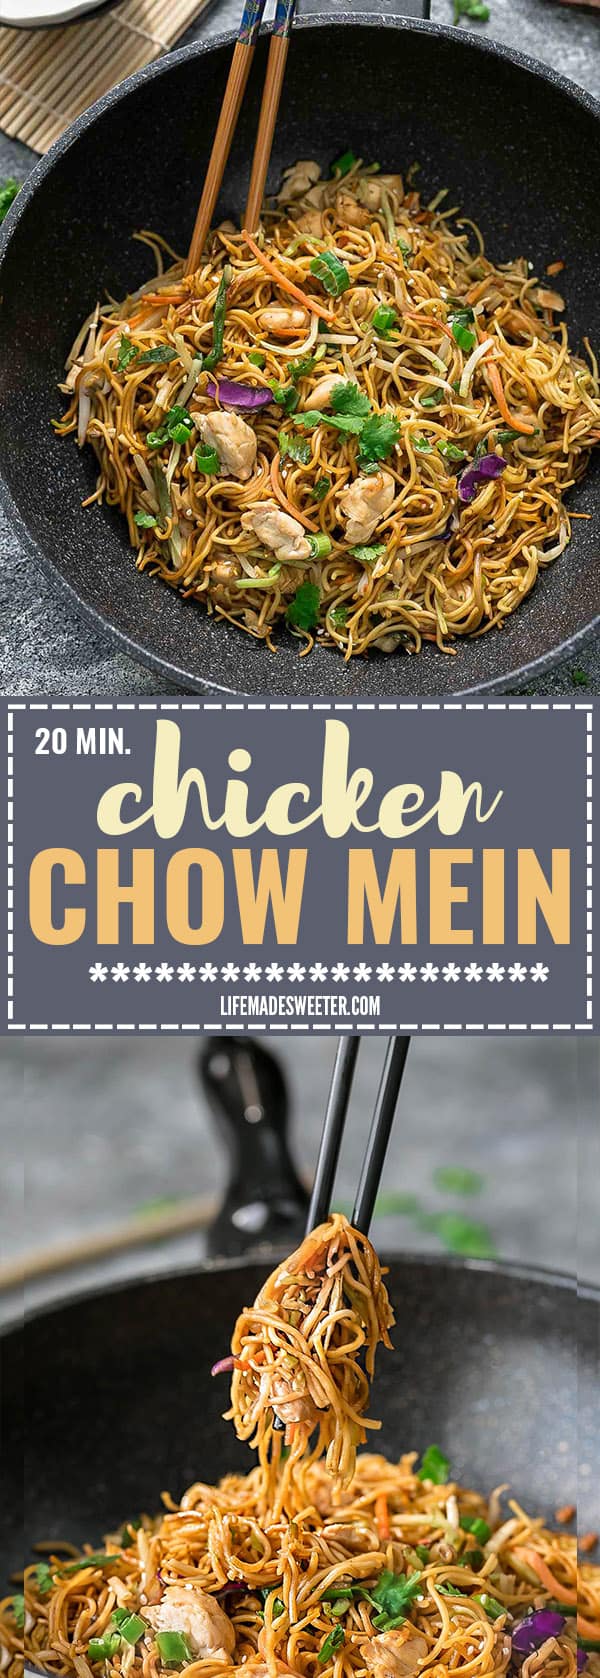 Chicken Chow Mein is the perfect easy weeknight meal! Best of all, it comes together in under 20 minutes in just one pot! Forget calling restaurant takeout, this recipe is so much better with authentic flavors. Seriously the best!!